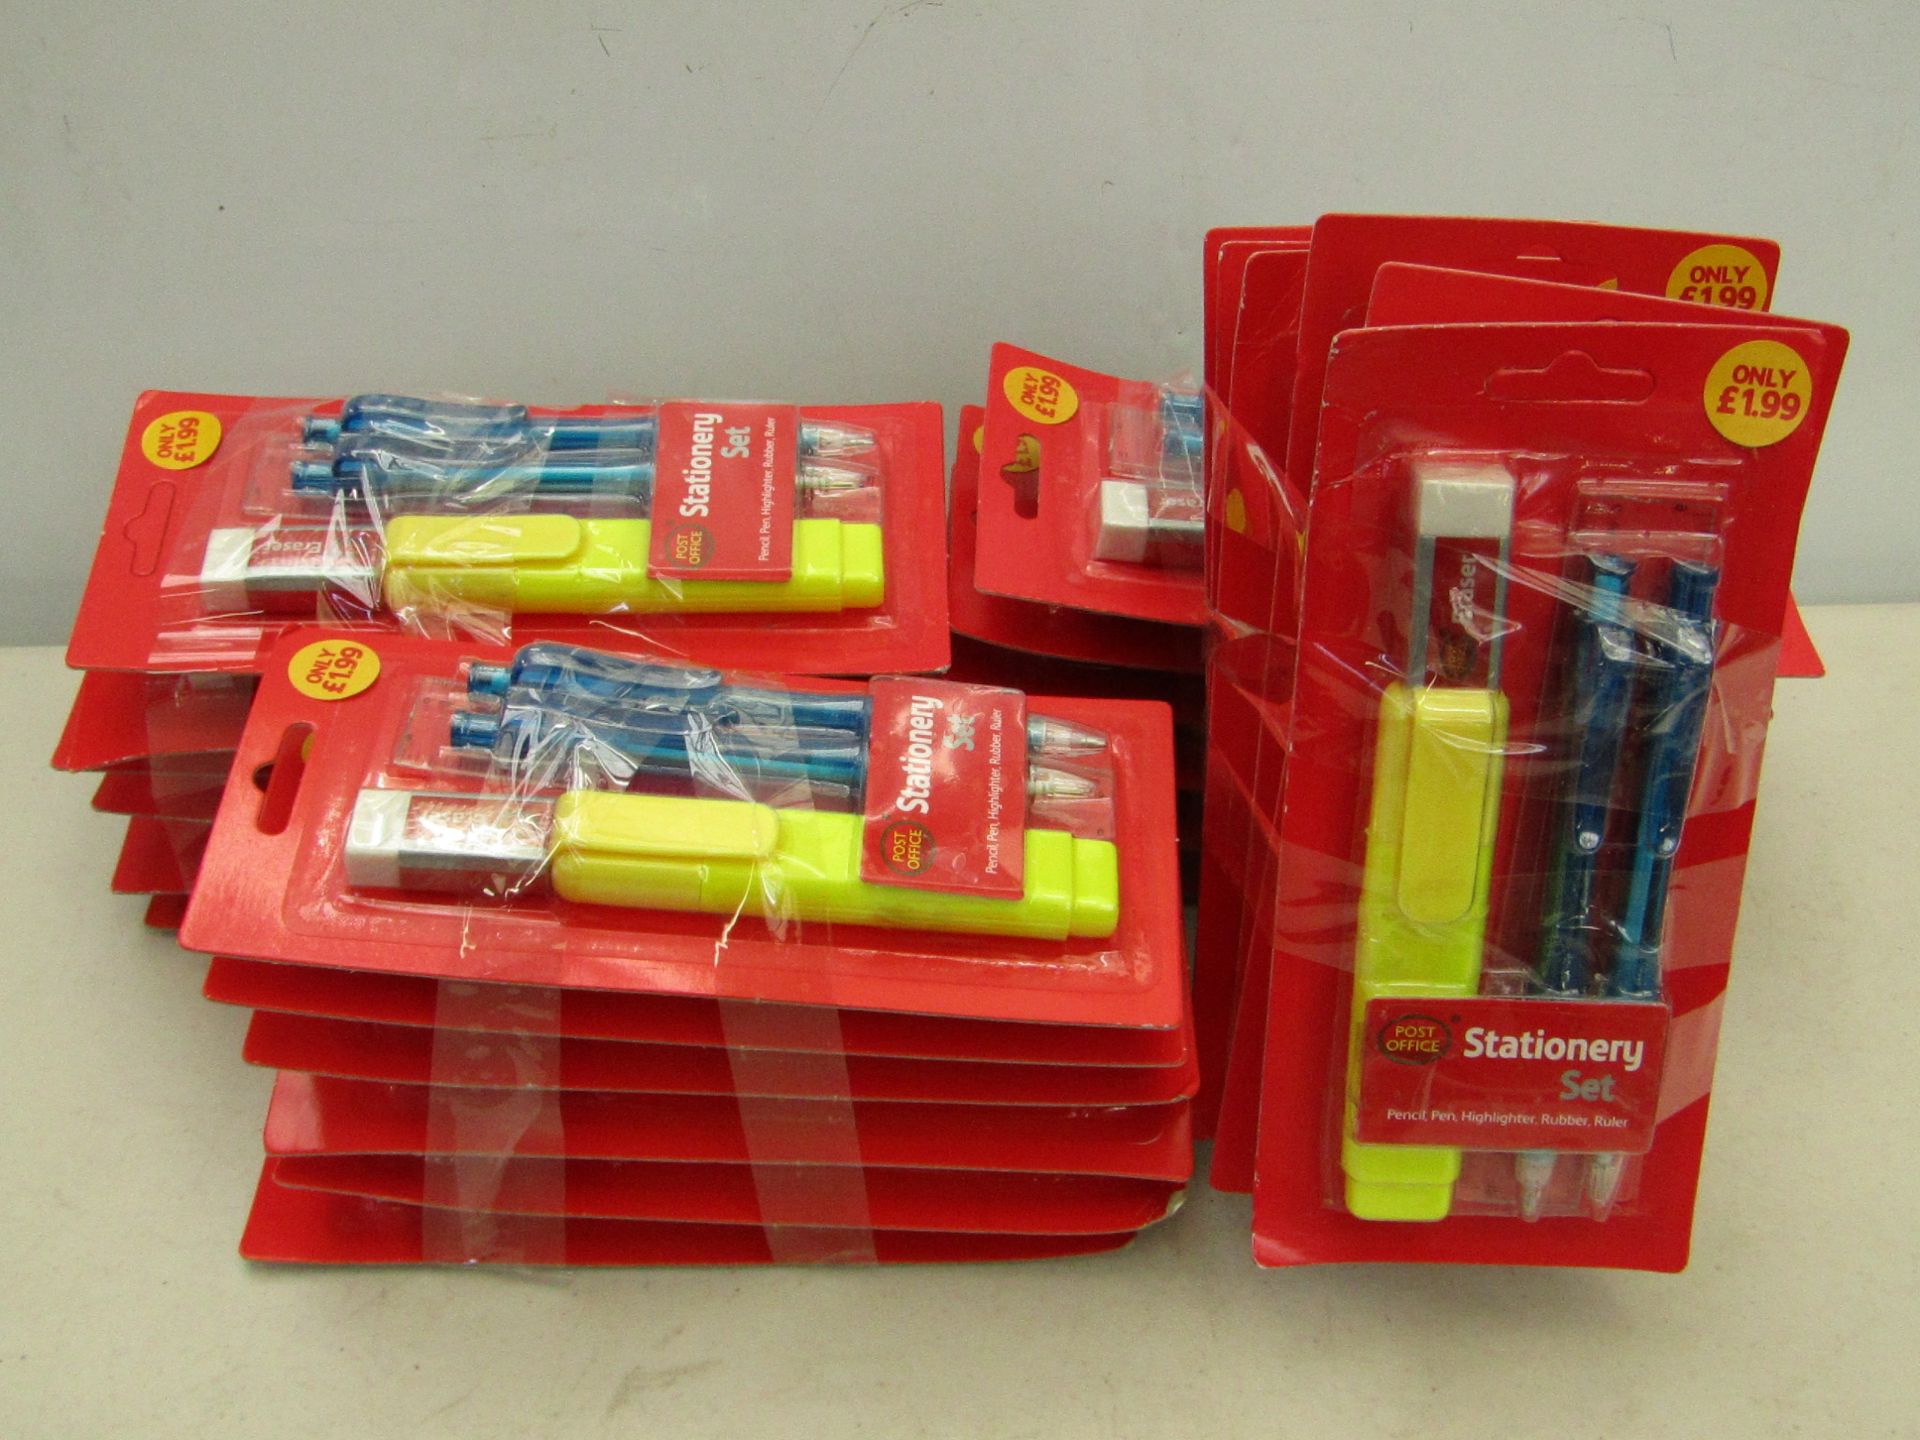 24x Post Office stationary sets, each set includes: pencil, pen, highlighter, rubber, ruler.